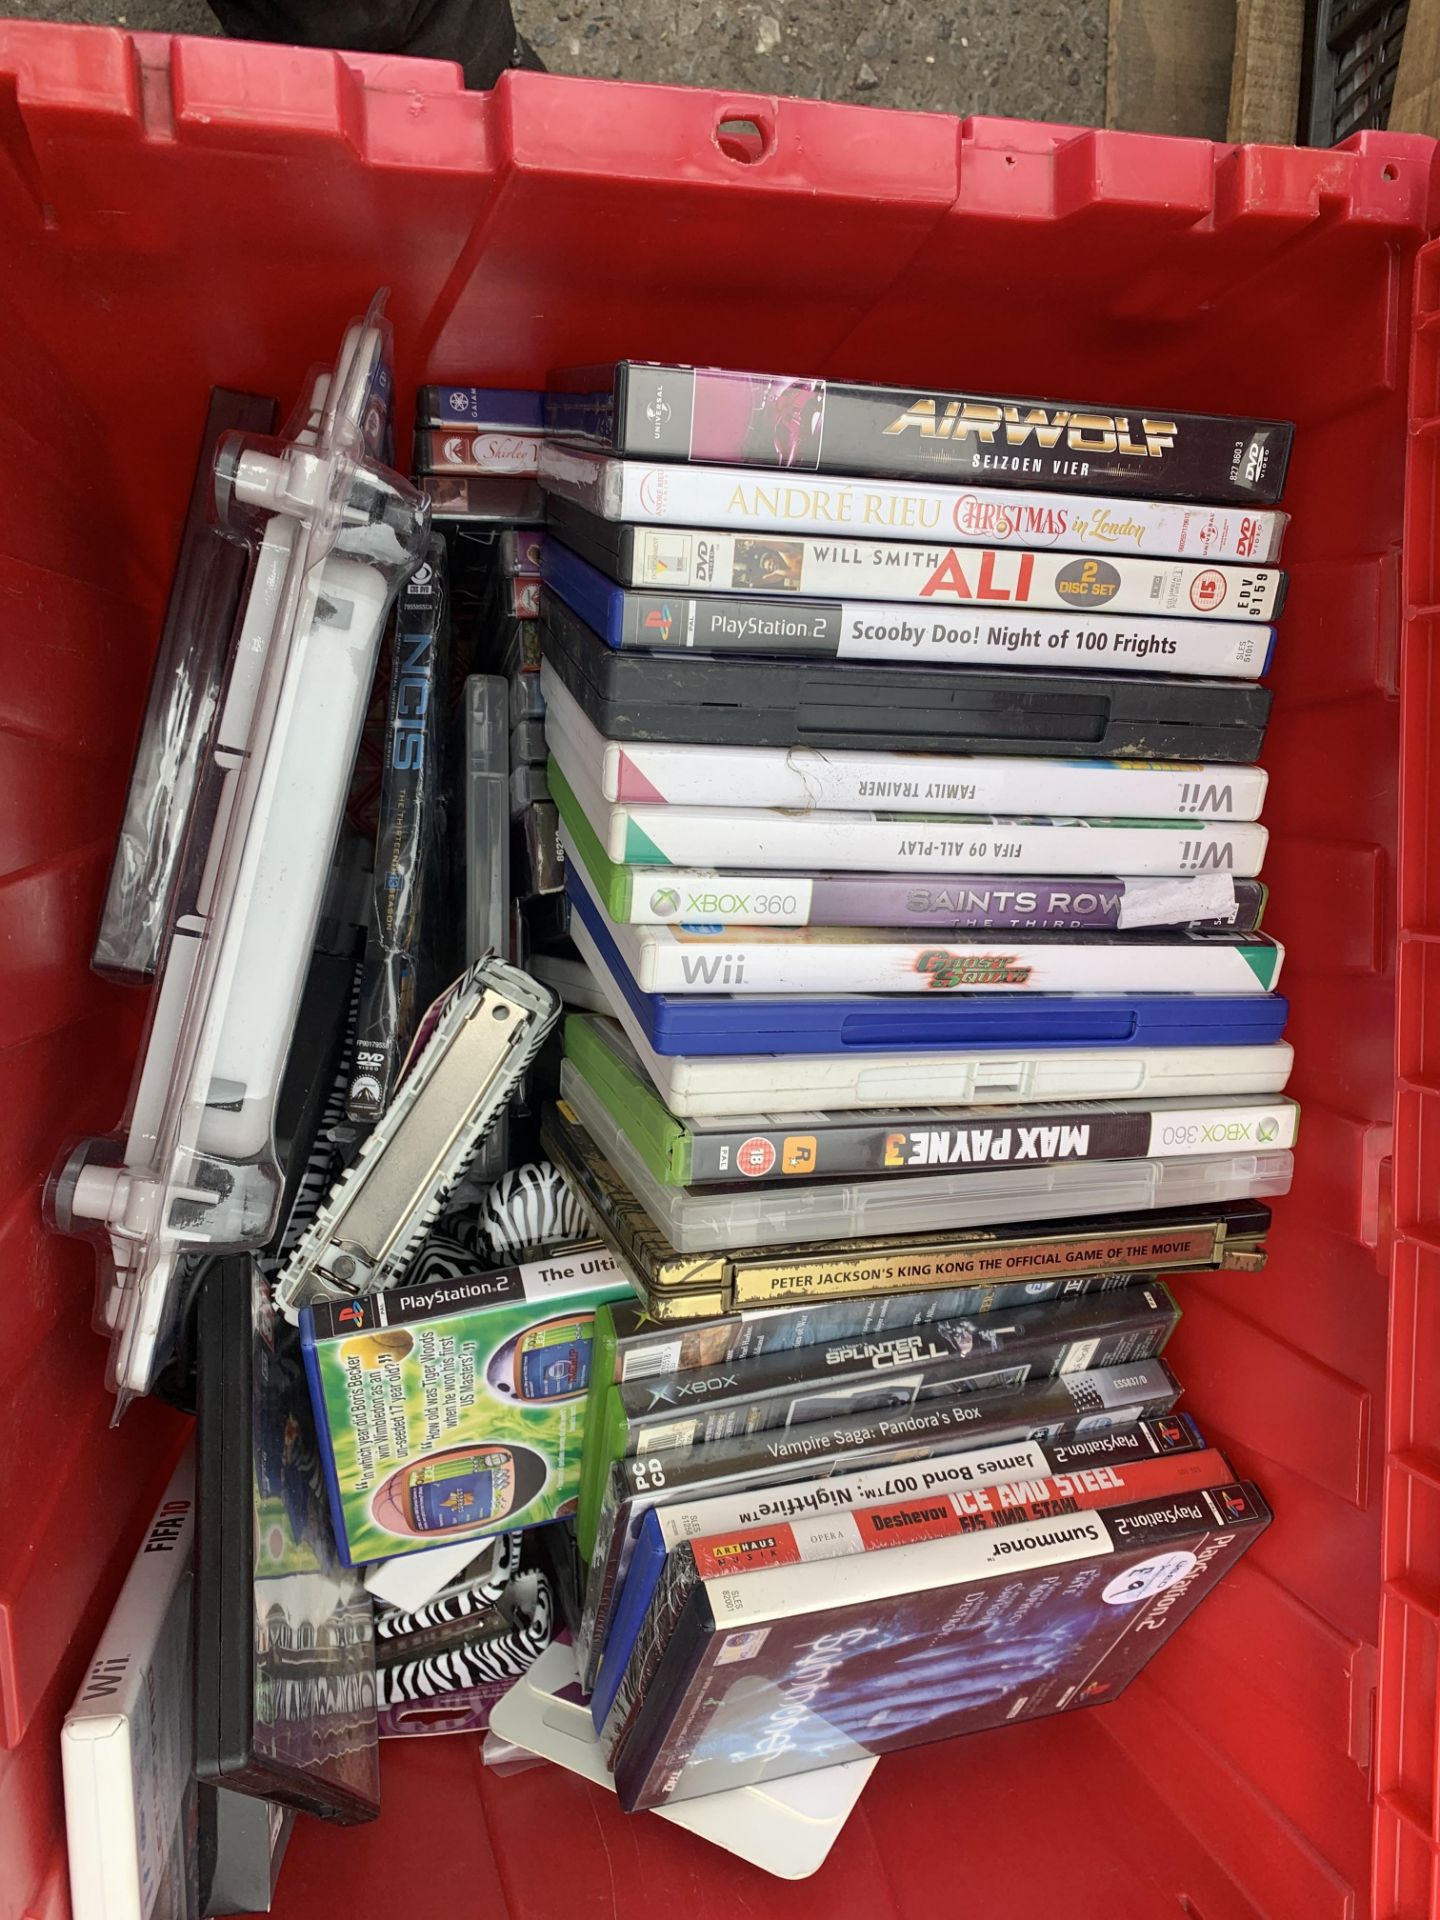 MIXED LOT CONTAINING UNDER ARMOUR CAPS, DVDS, COMPUTER GAMES, BOB THE BUILDER TOYS, ACCESSORIES ETC - Image 7 of 11